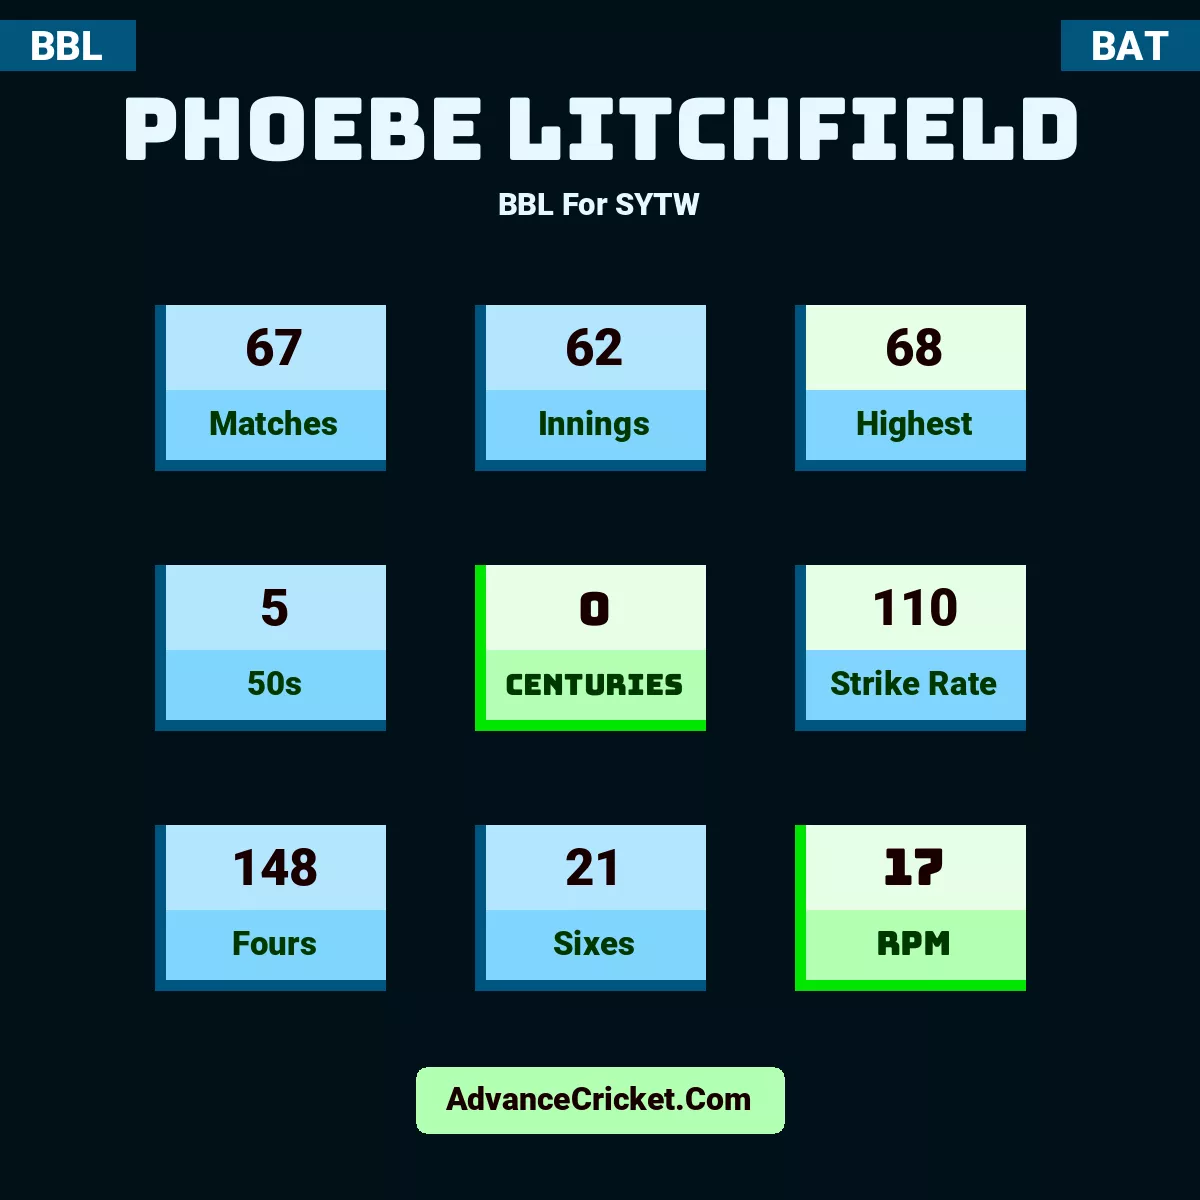 Phoebe Litchfield BBL  For SYTW, Phoebe Litchfield played 67 matches, scored 68 runs as highest, 5 half-centuries, and 0 centuries, with a strike rate of 110. P.Litchfield hit 148 fours and 21 sixes, with an RPM of 17.